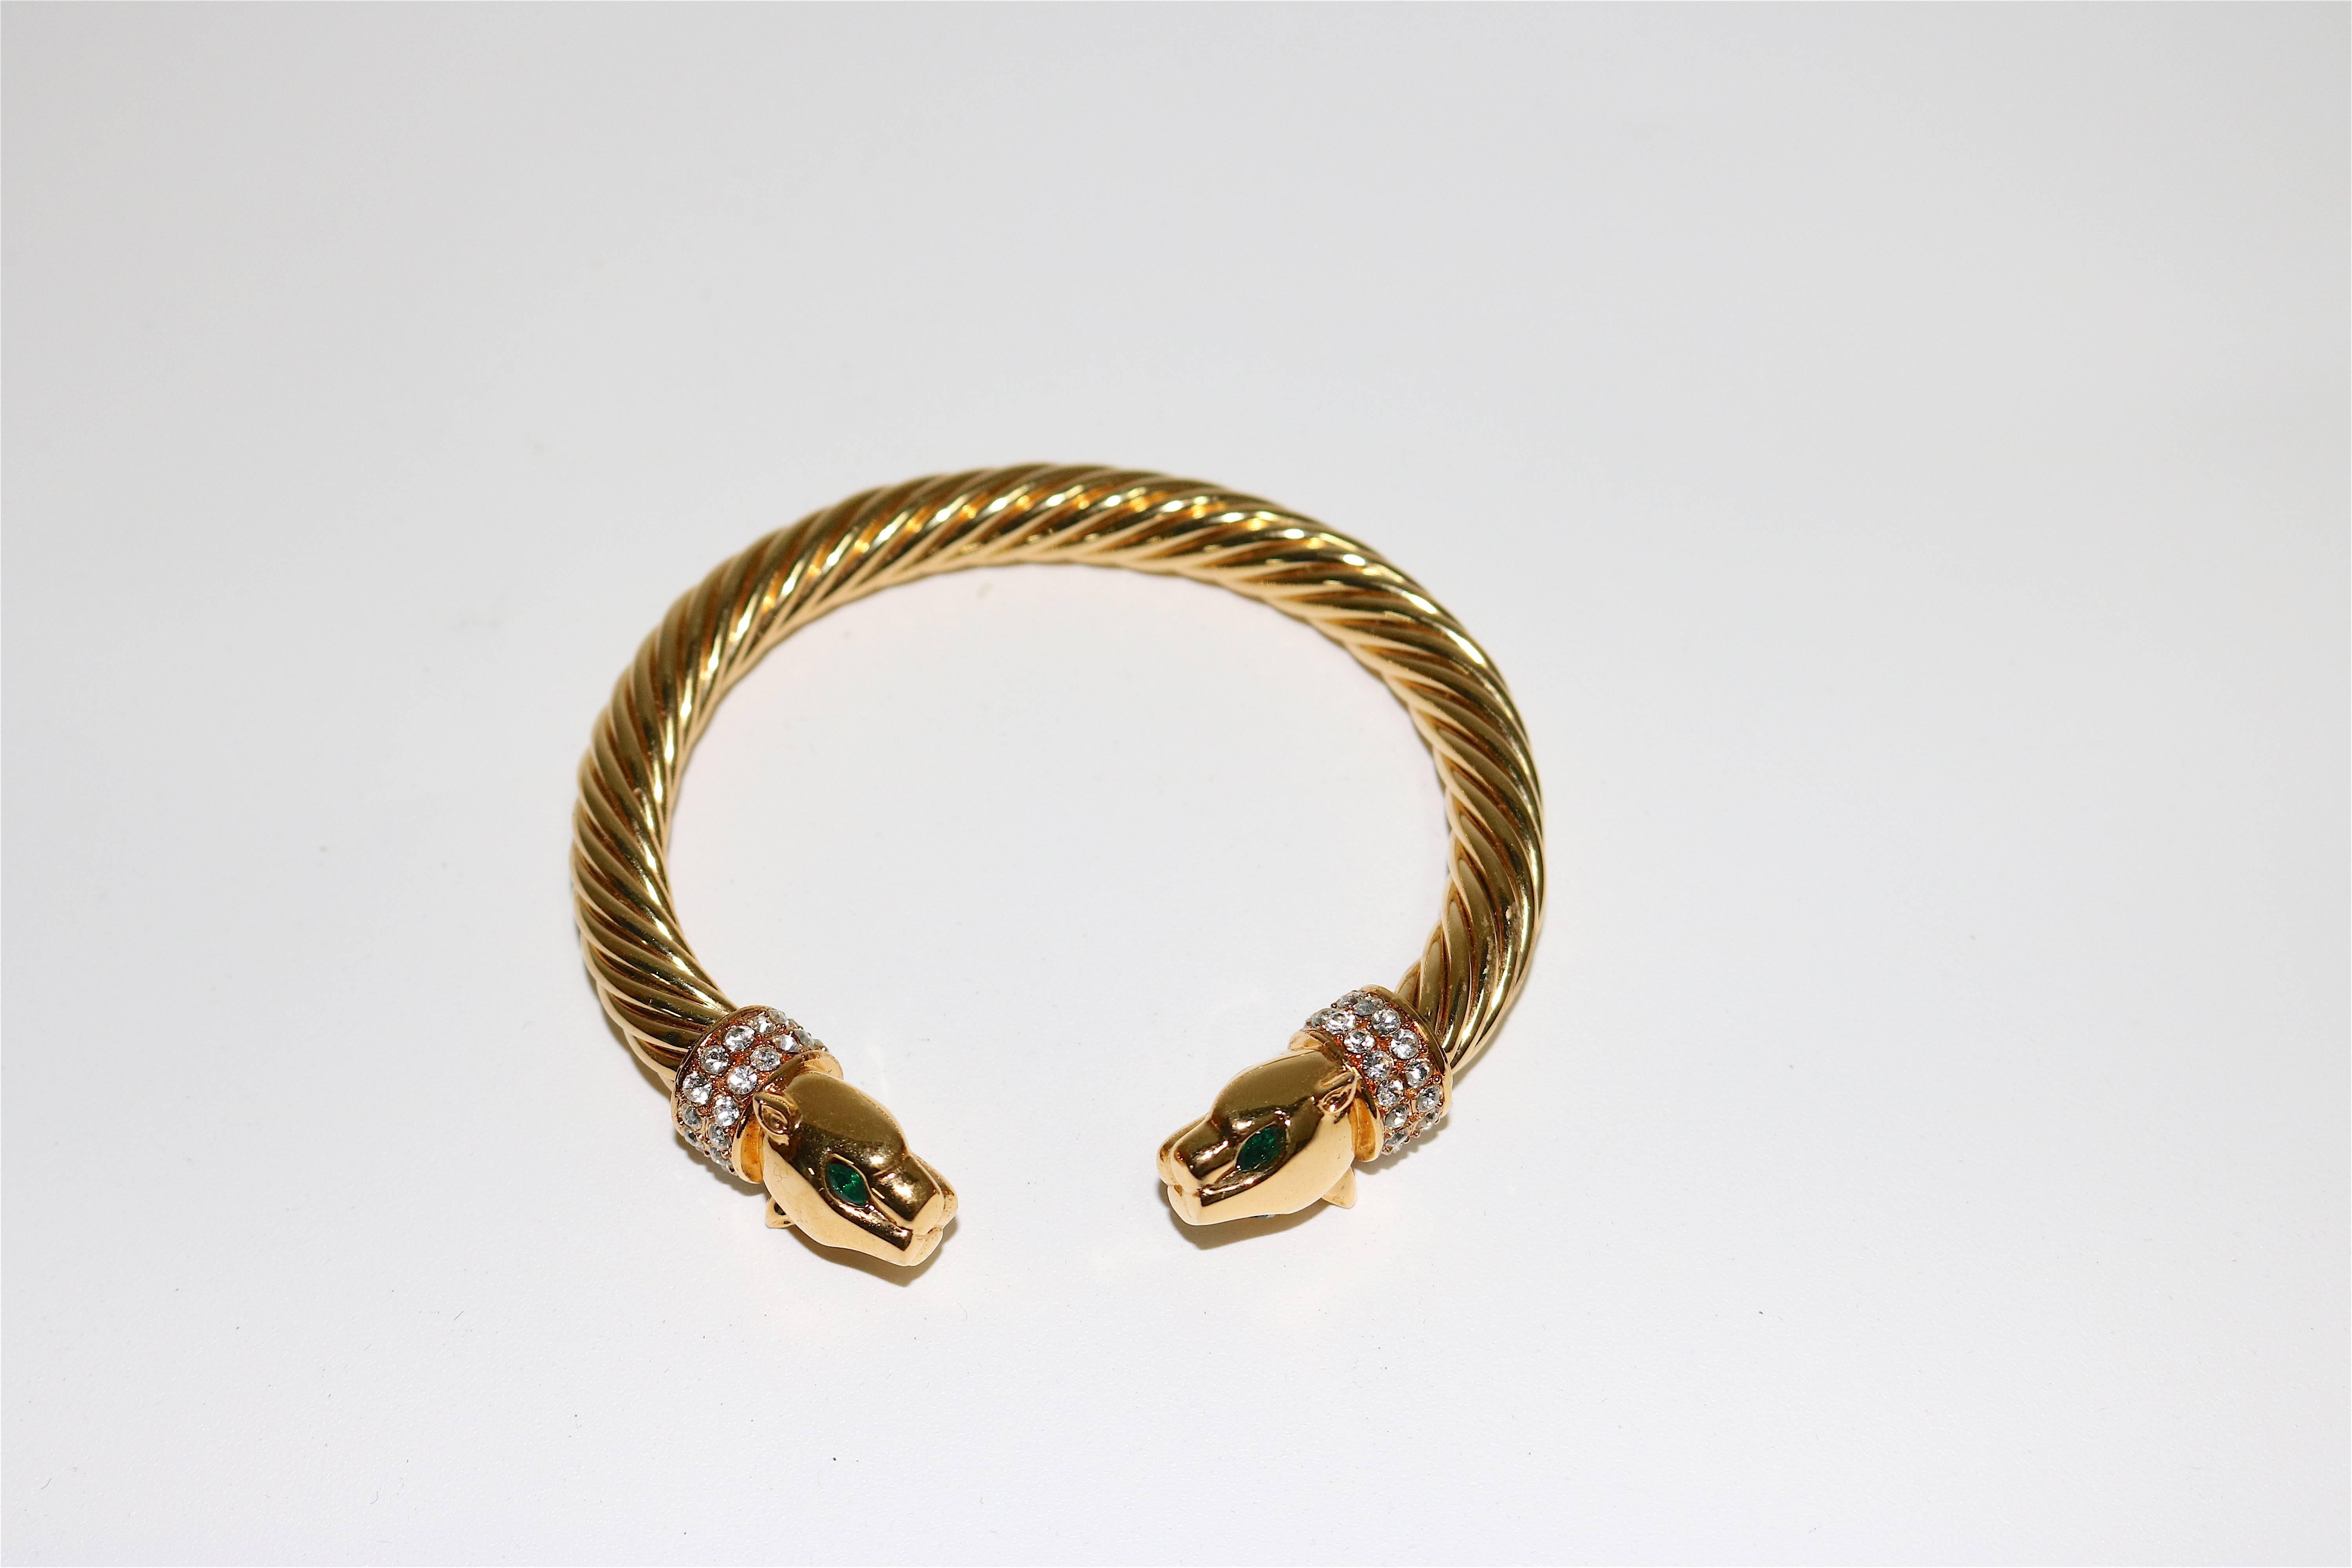 A Jackie Collins original fashion design Glam Bracelet, in the manner of Cartier's rare gold panther Torc bangle bracelet selling for $25,000. and up.
This is a lovely gold-plated Torc bangle bracelet with rhinestone collar panther head end caps and